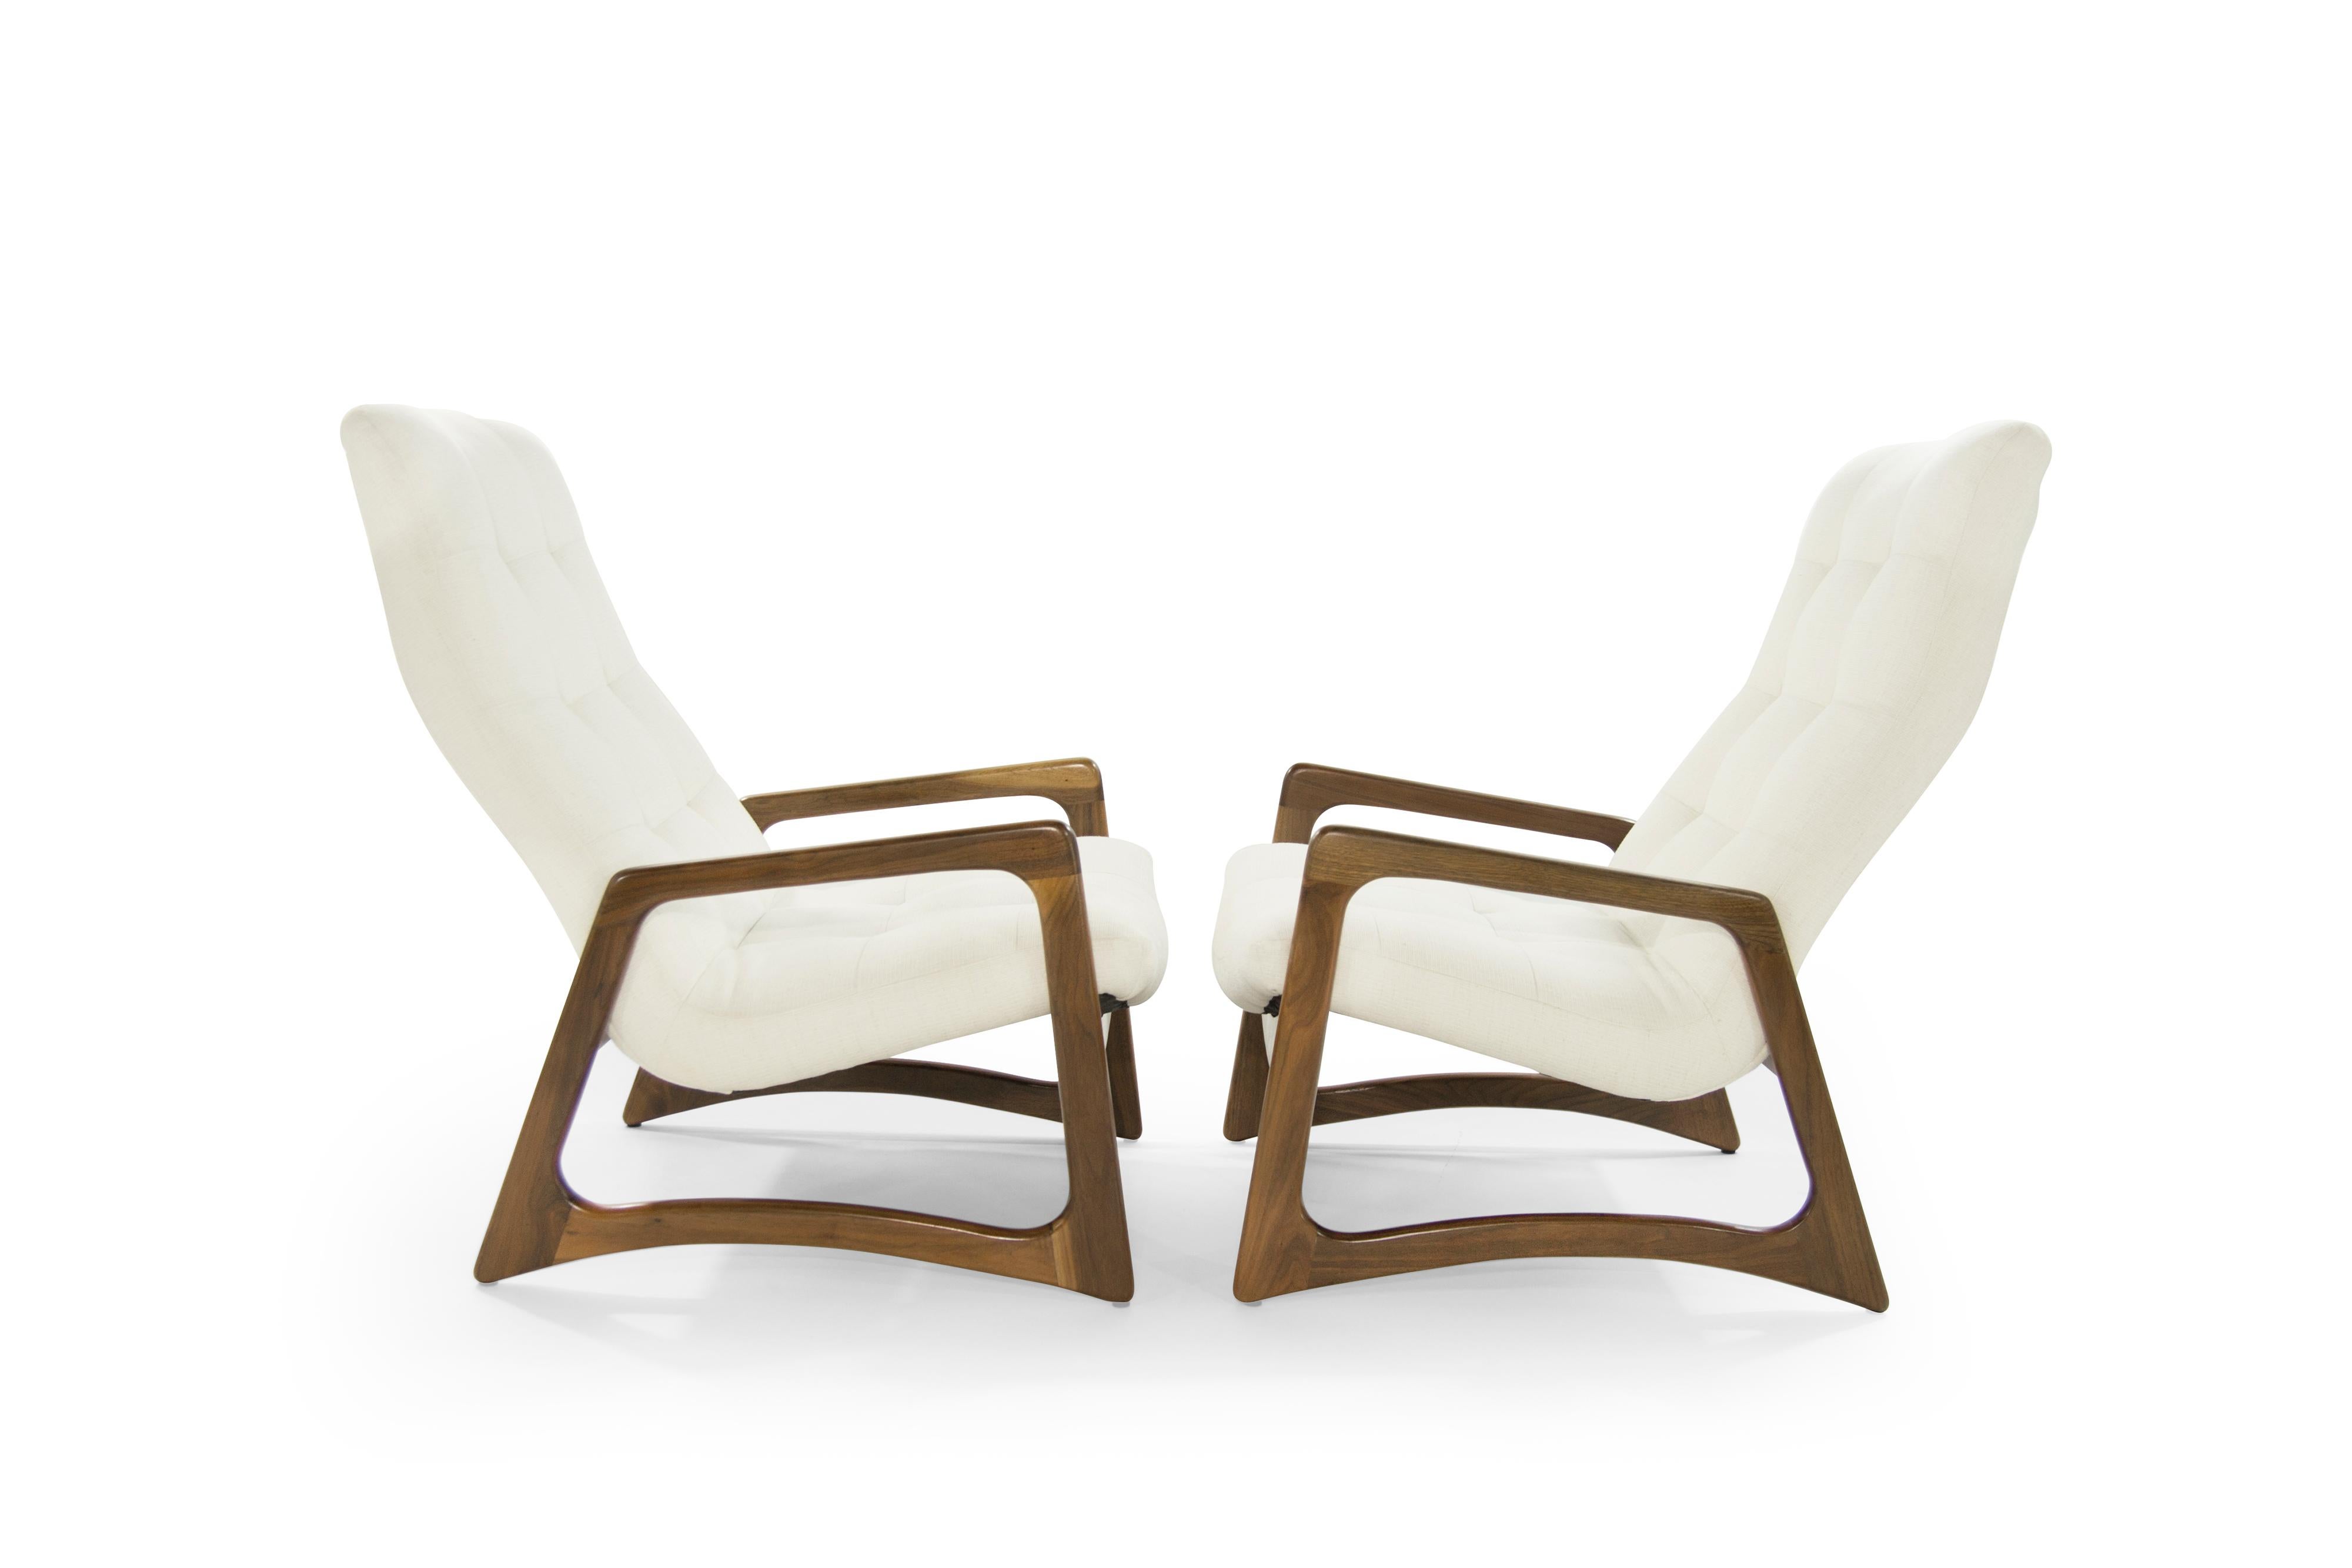 Pair of lounge chairs designed by Adrian Pearsall, circa 1950s. Sculptural walnut framing fully restored, newly upholstered in off-white twill by Holly Hunt.